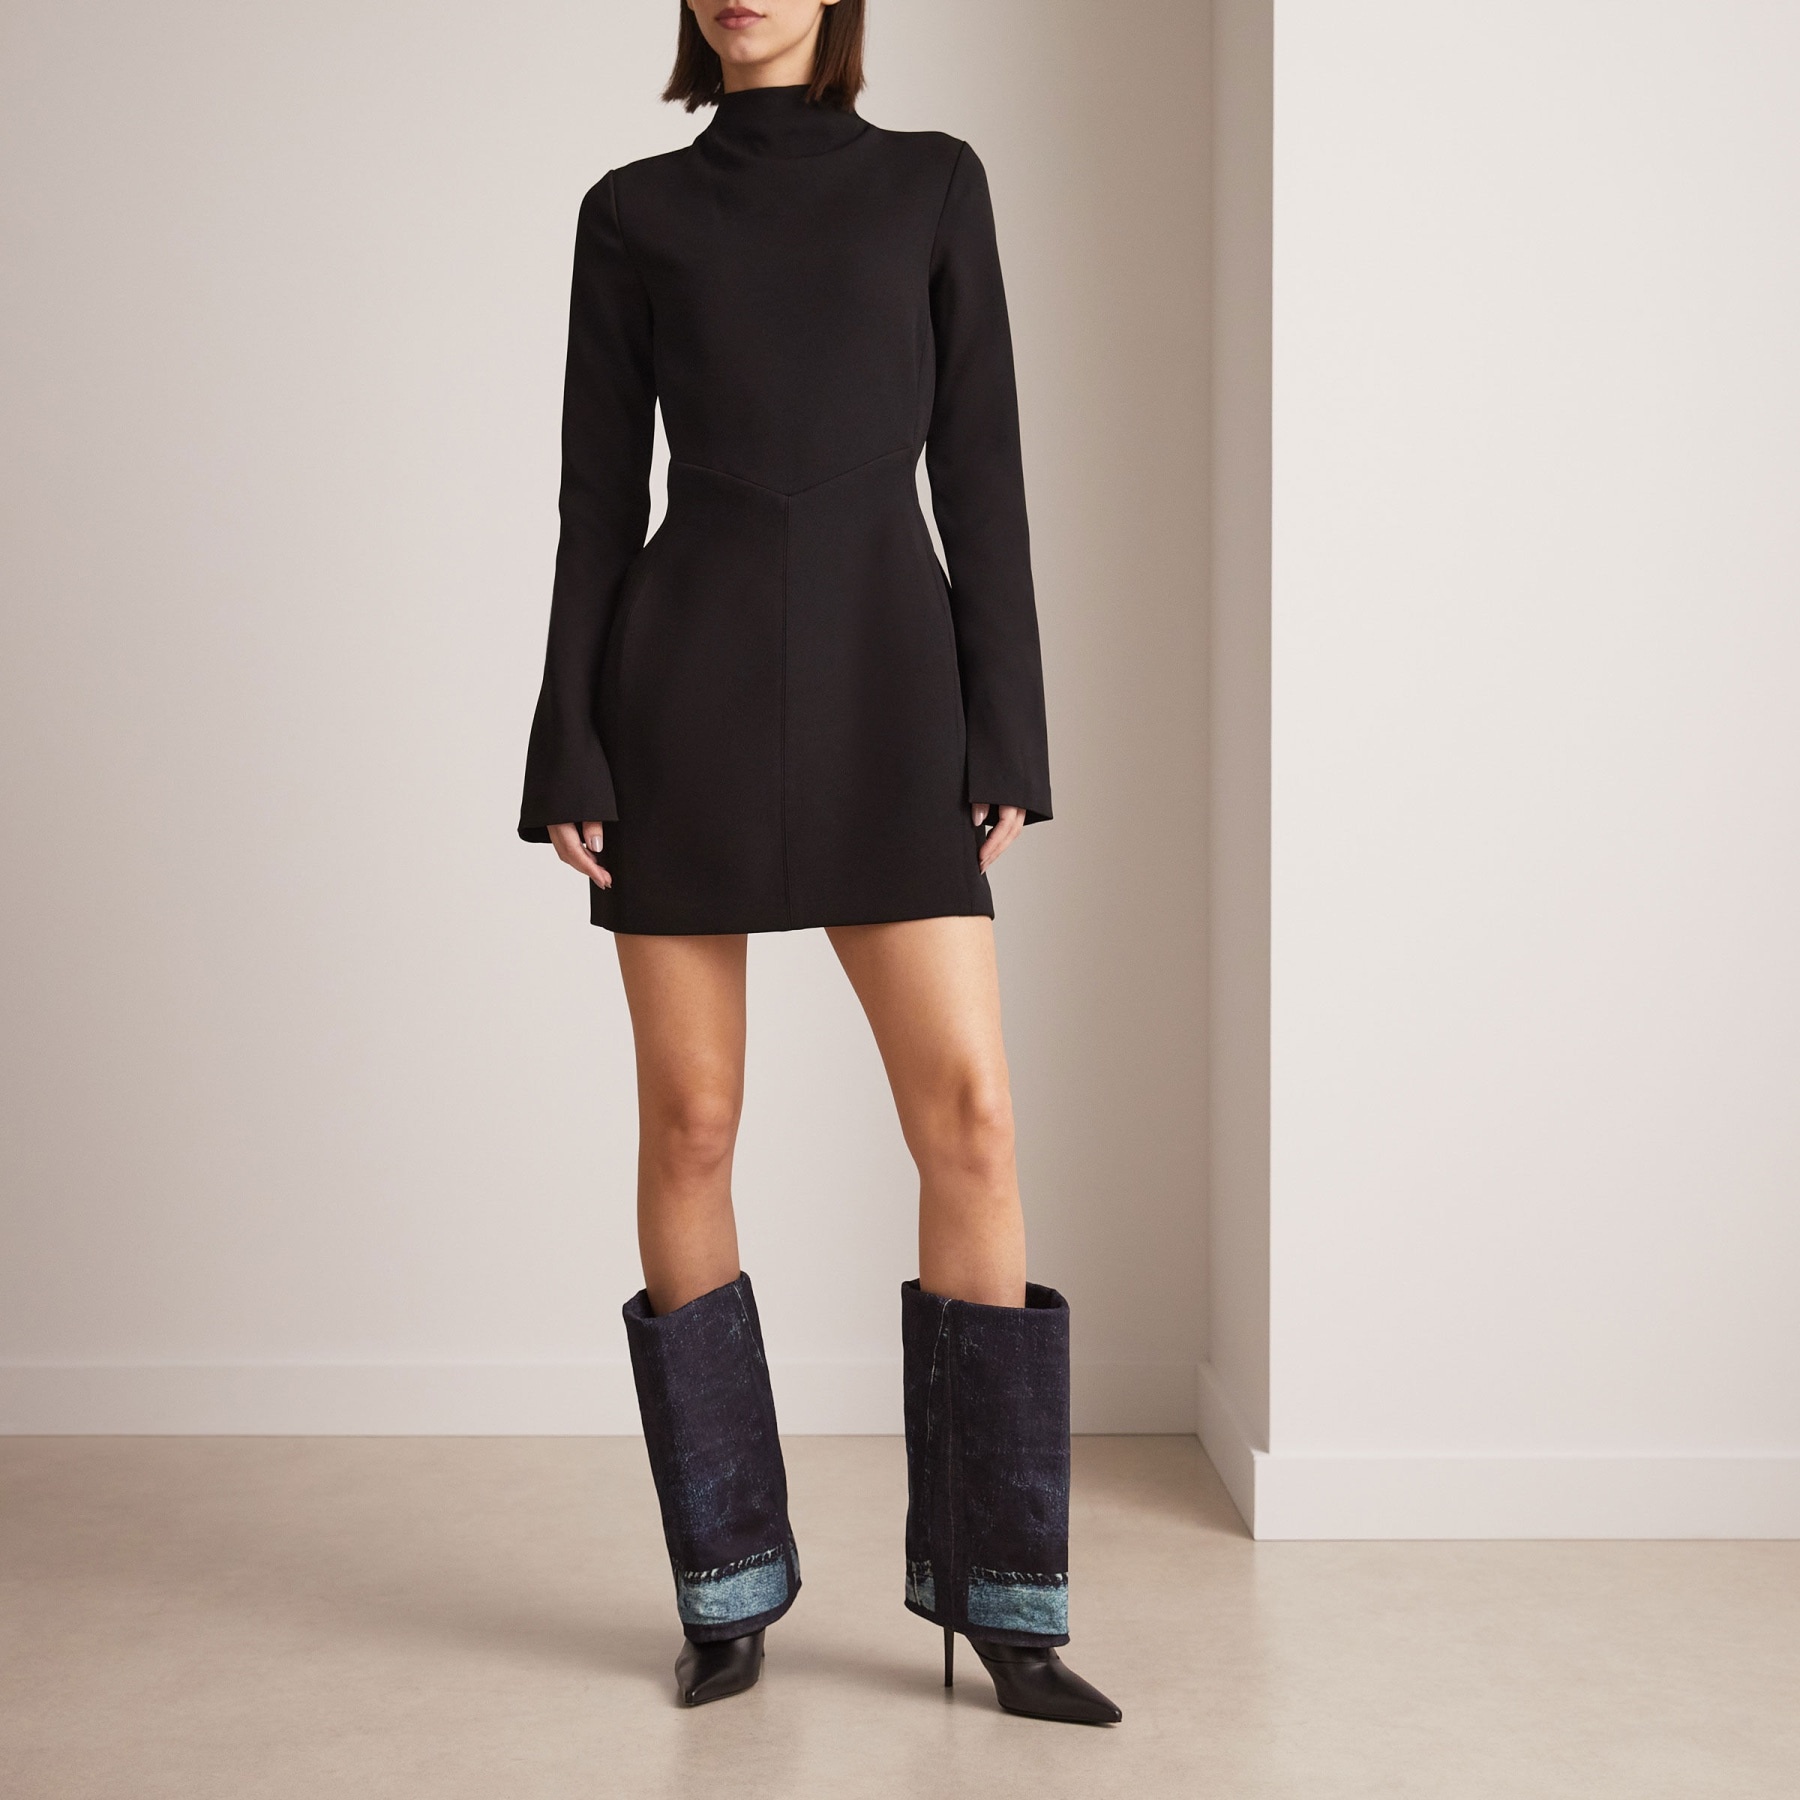 Jimmy Choo / Jean Paul Gaultier Cuff Over The Knee Boot 90
Black Calf Leather Over-The-Knee Boots wi - 2